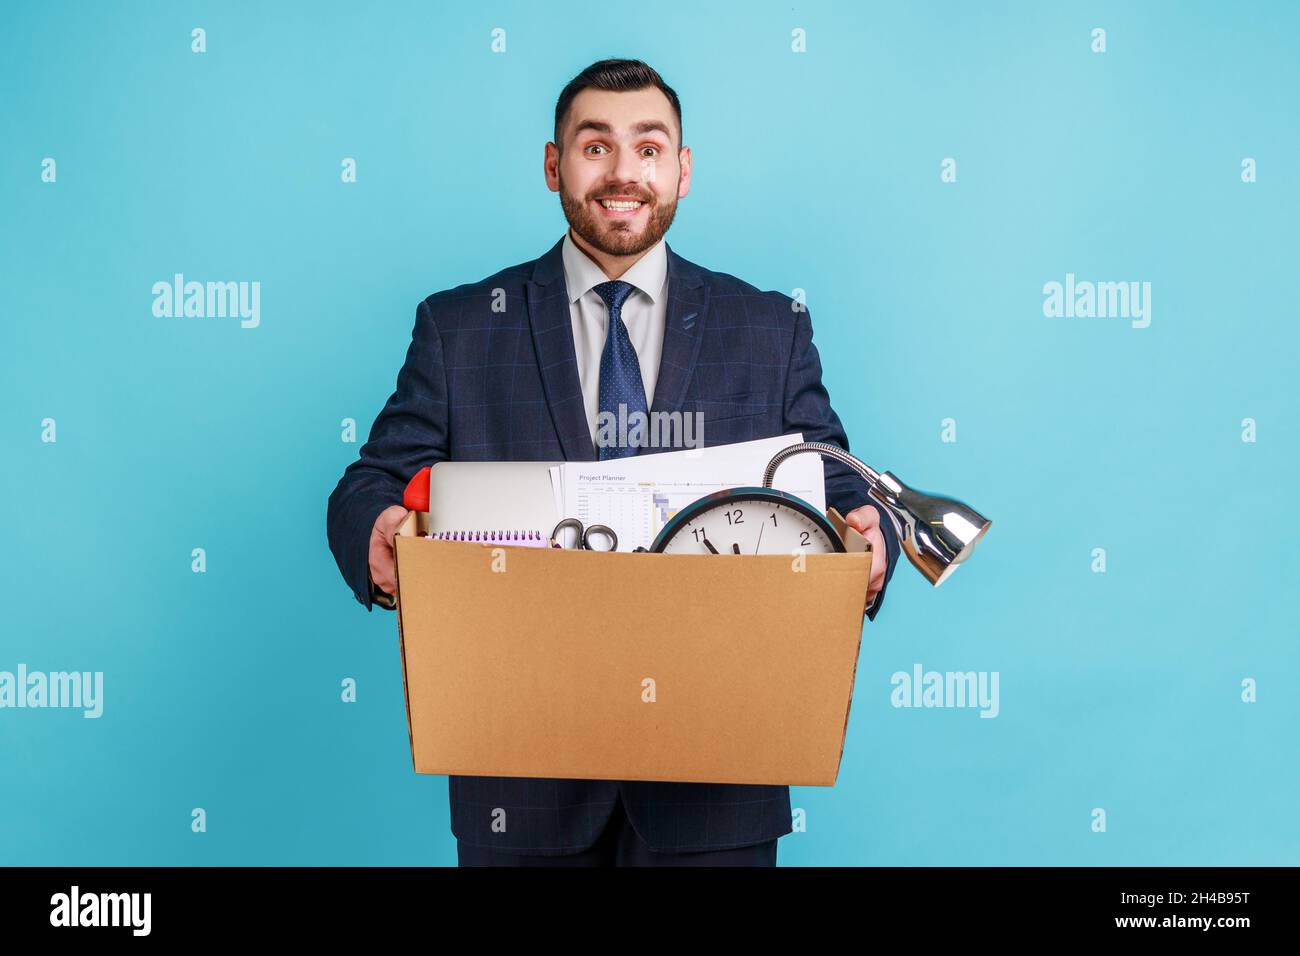 Extremely happy young adult man with beard wearing dark official style suit, stands smiling holding big cardboard box with his stuff, getting new job. Indoor studio shot isolated on blue background. Stock Photo